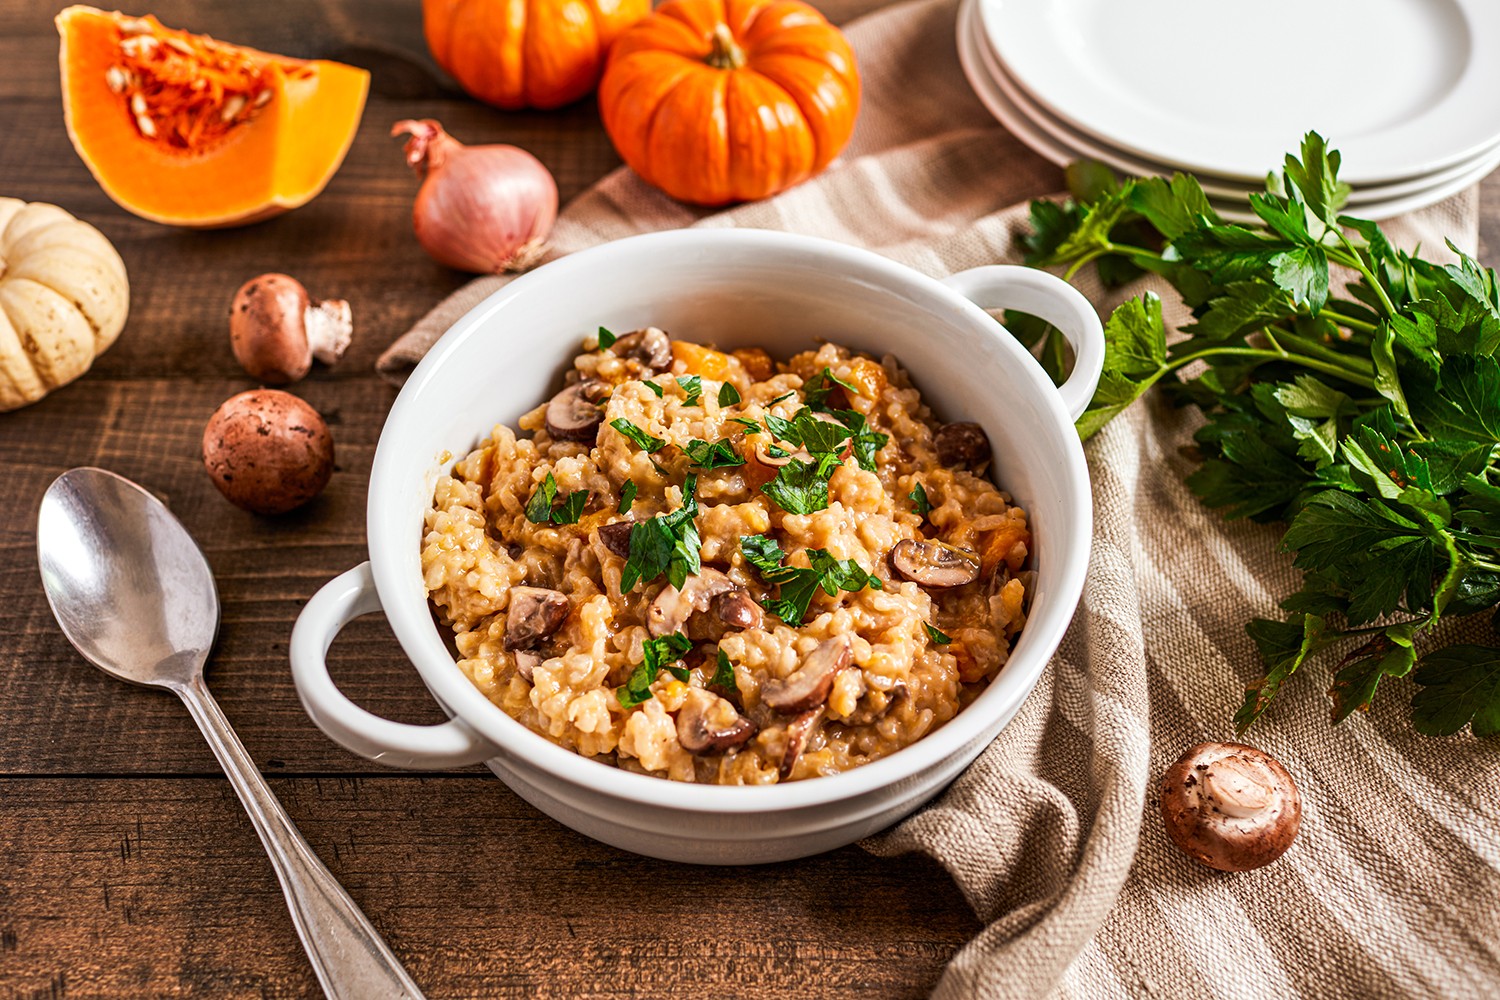 Pumpkin Risotto with Mushrooms (Italy)